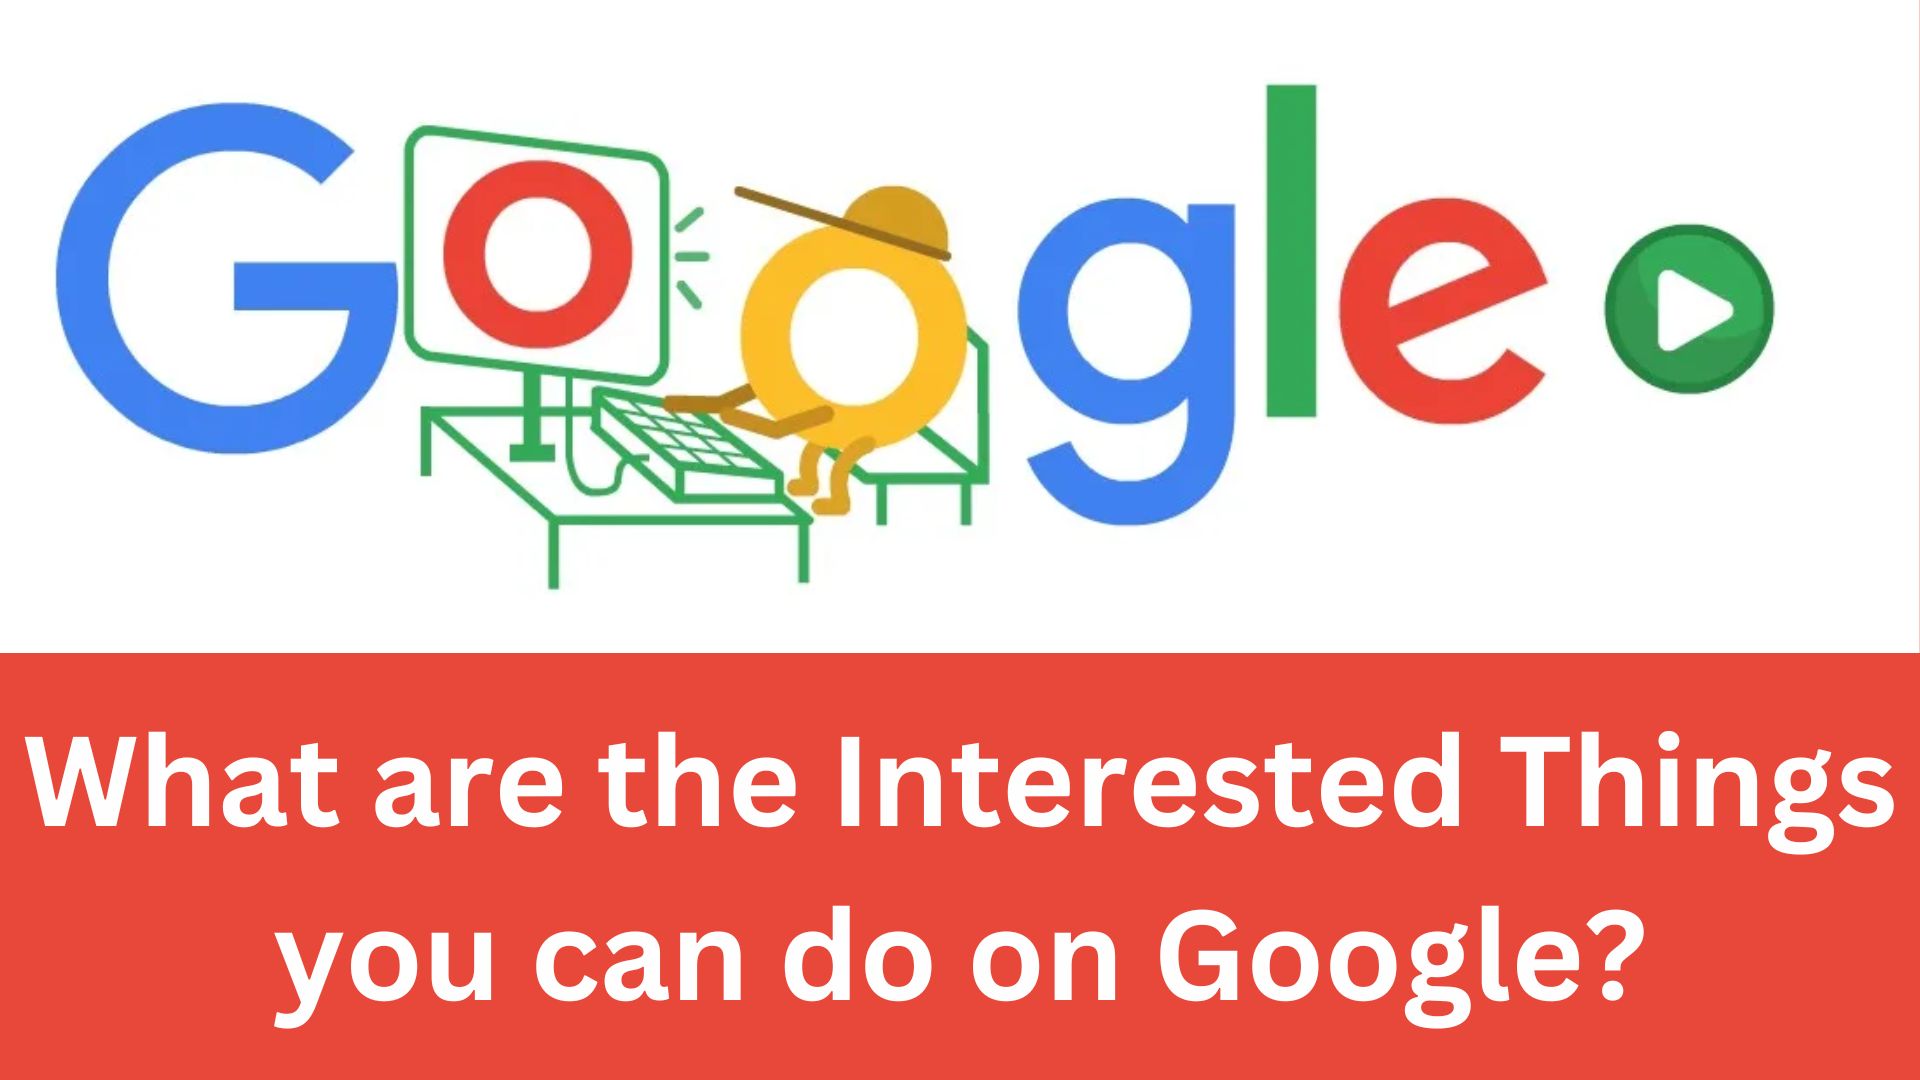 What are the Interested Things you can do on Google?